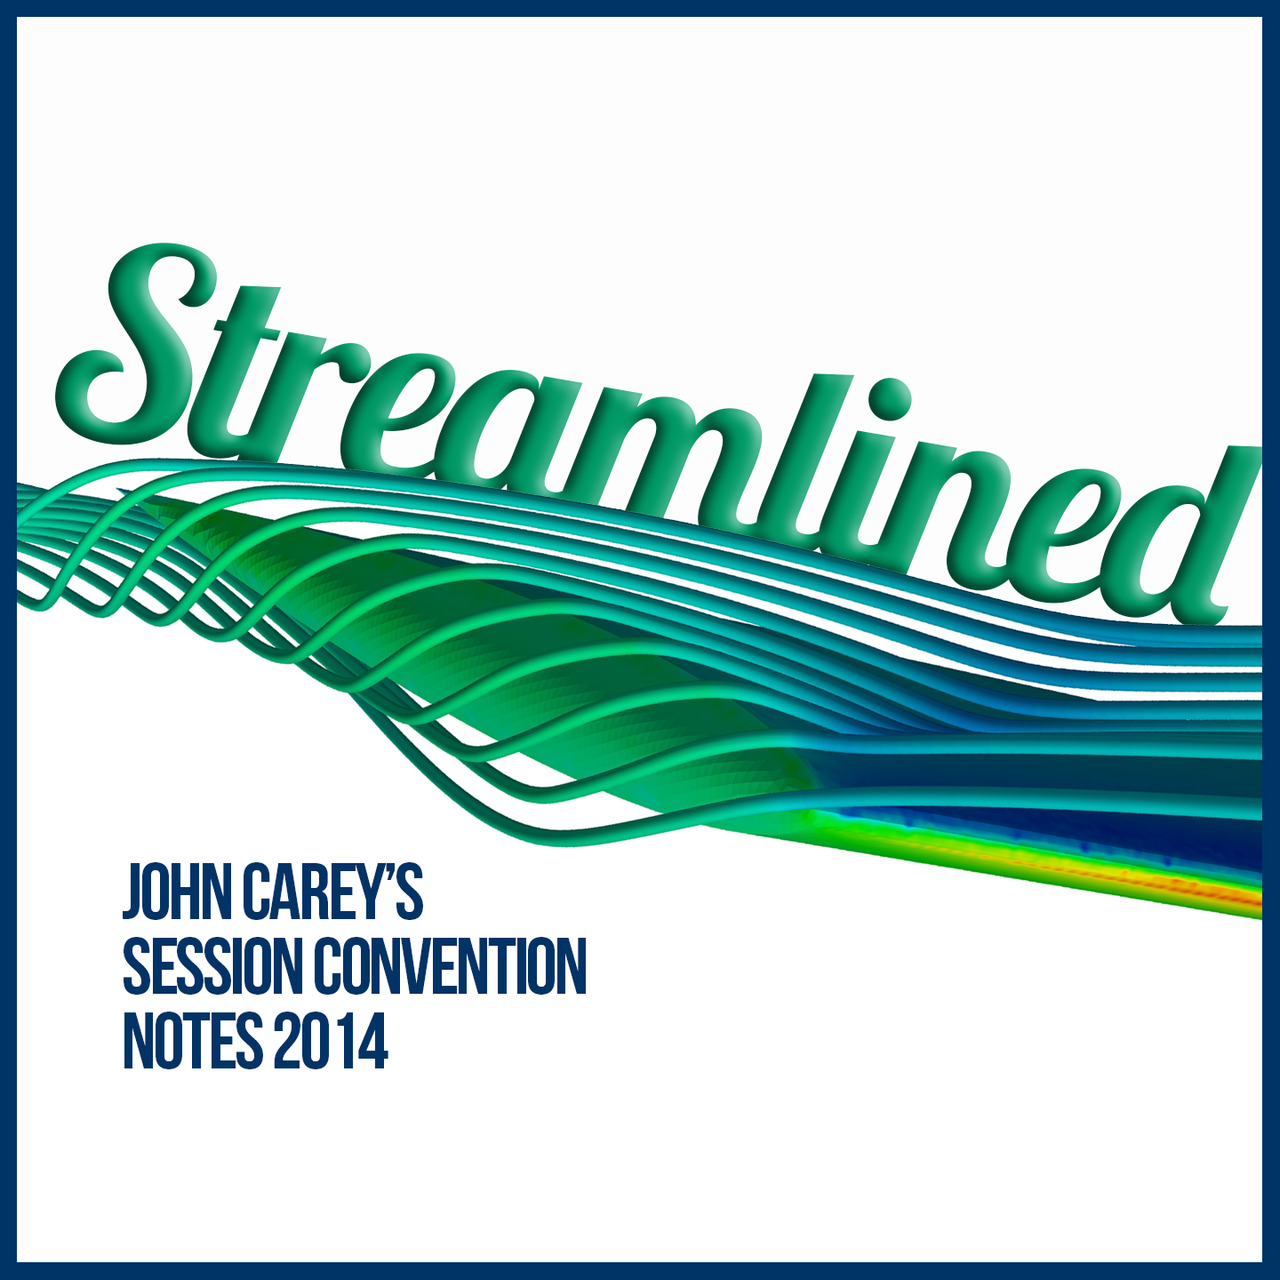 John Carey - Streamlined! The Session Convention Notes (2014)